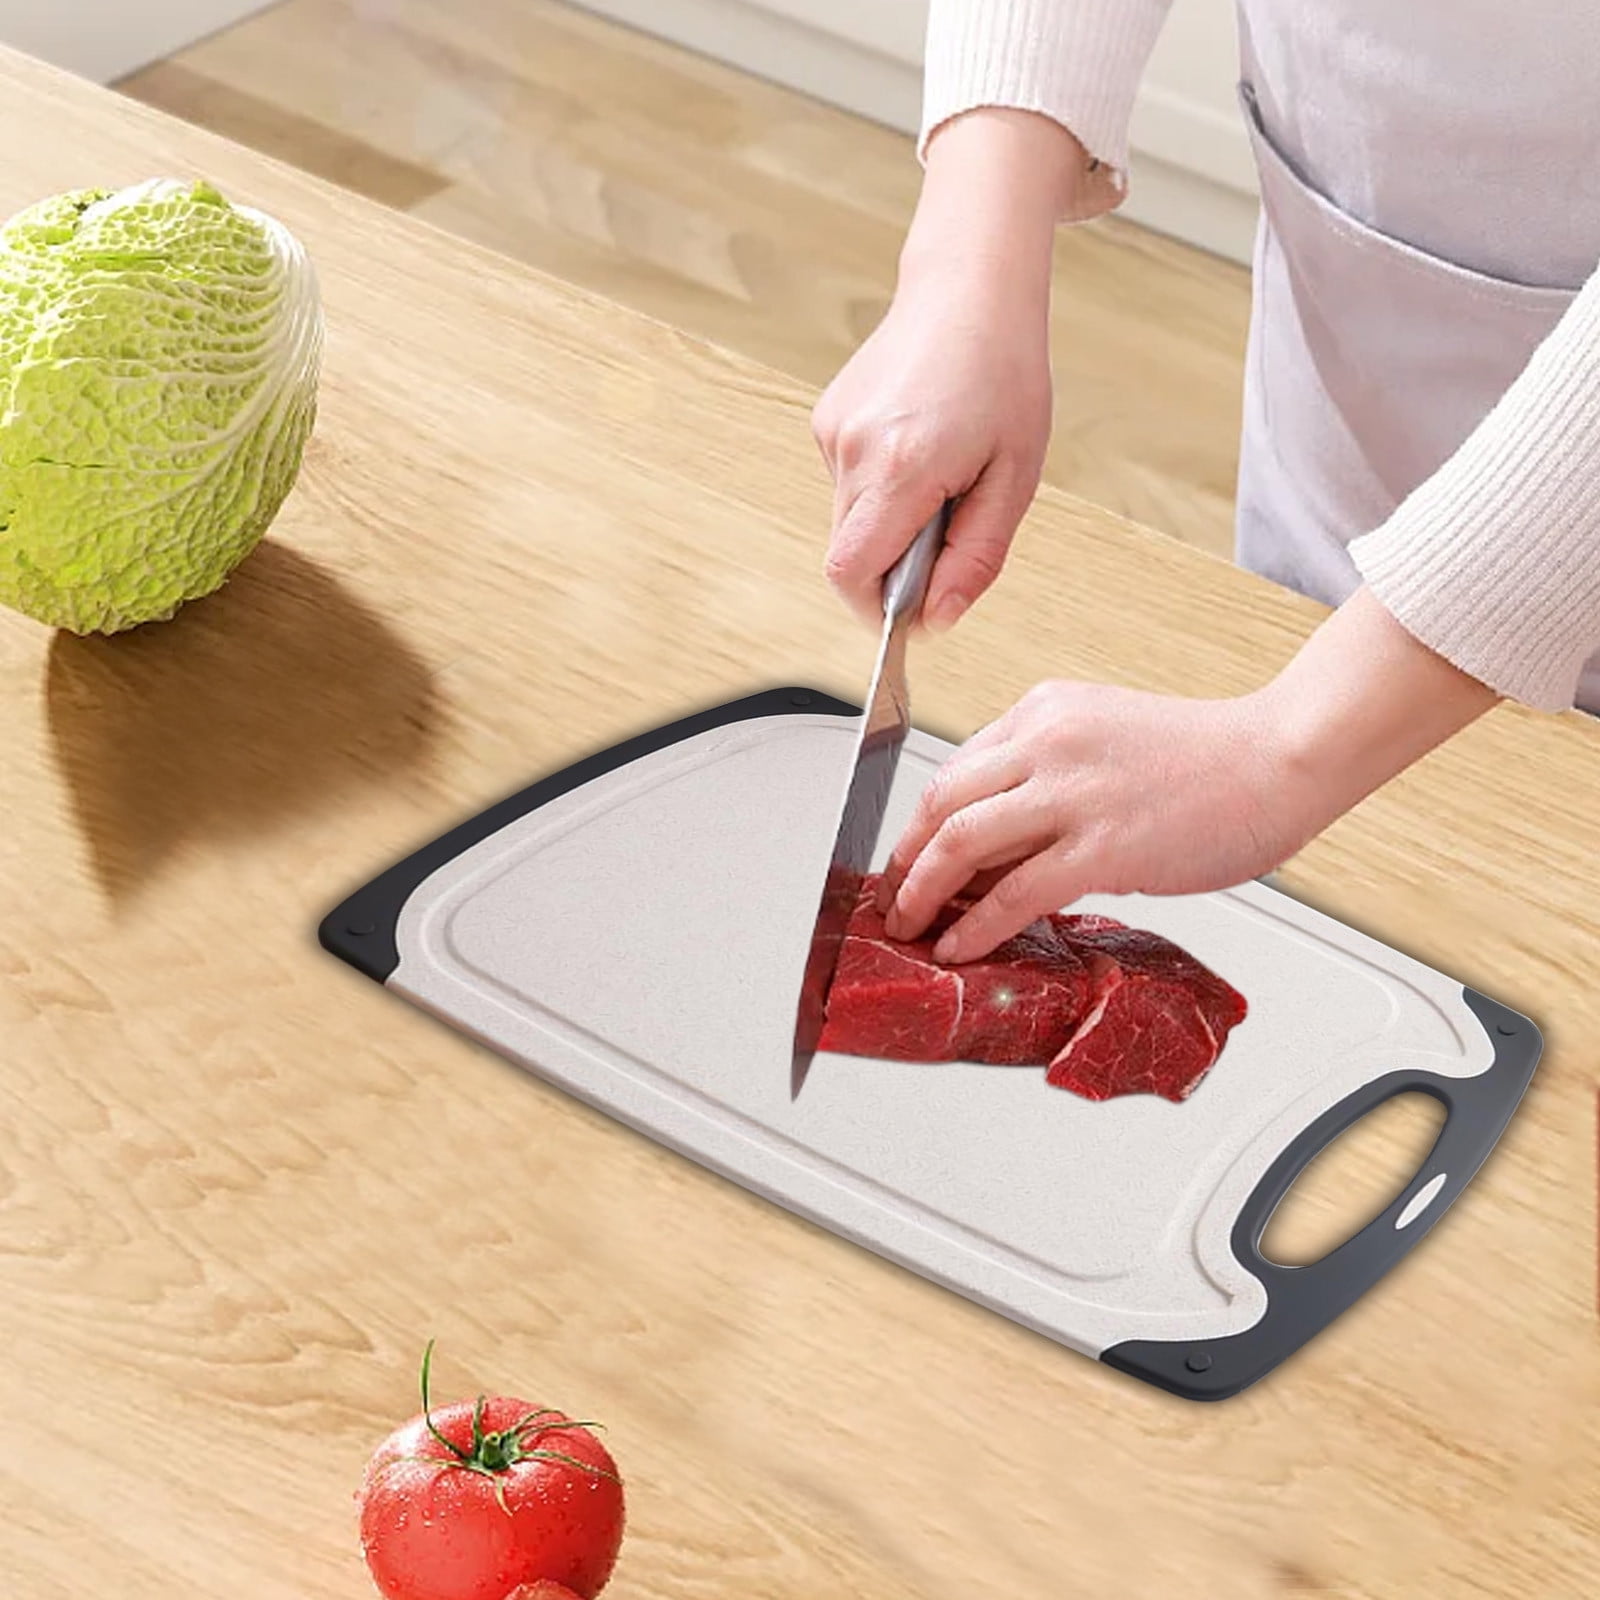 LWITHSZG Cutting Boards for Kitchen, Safe Plastic Chopping Board Non-Slip  Feet and Deep Drip Juice Groove, Easy Grip Handle, BPA Free, Non-porous